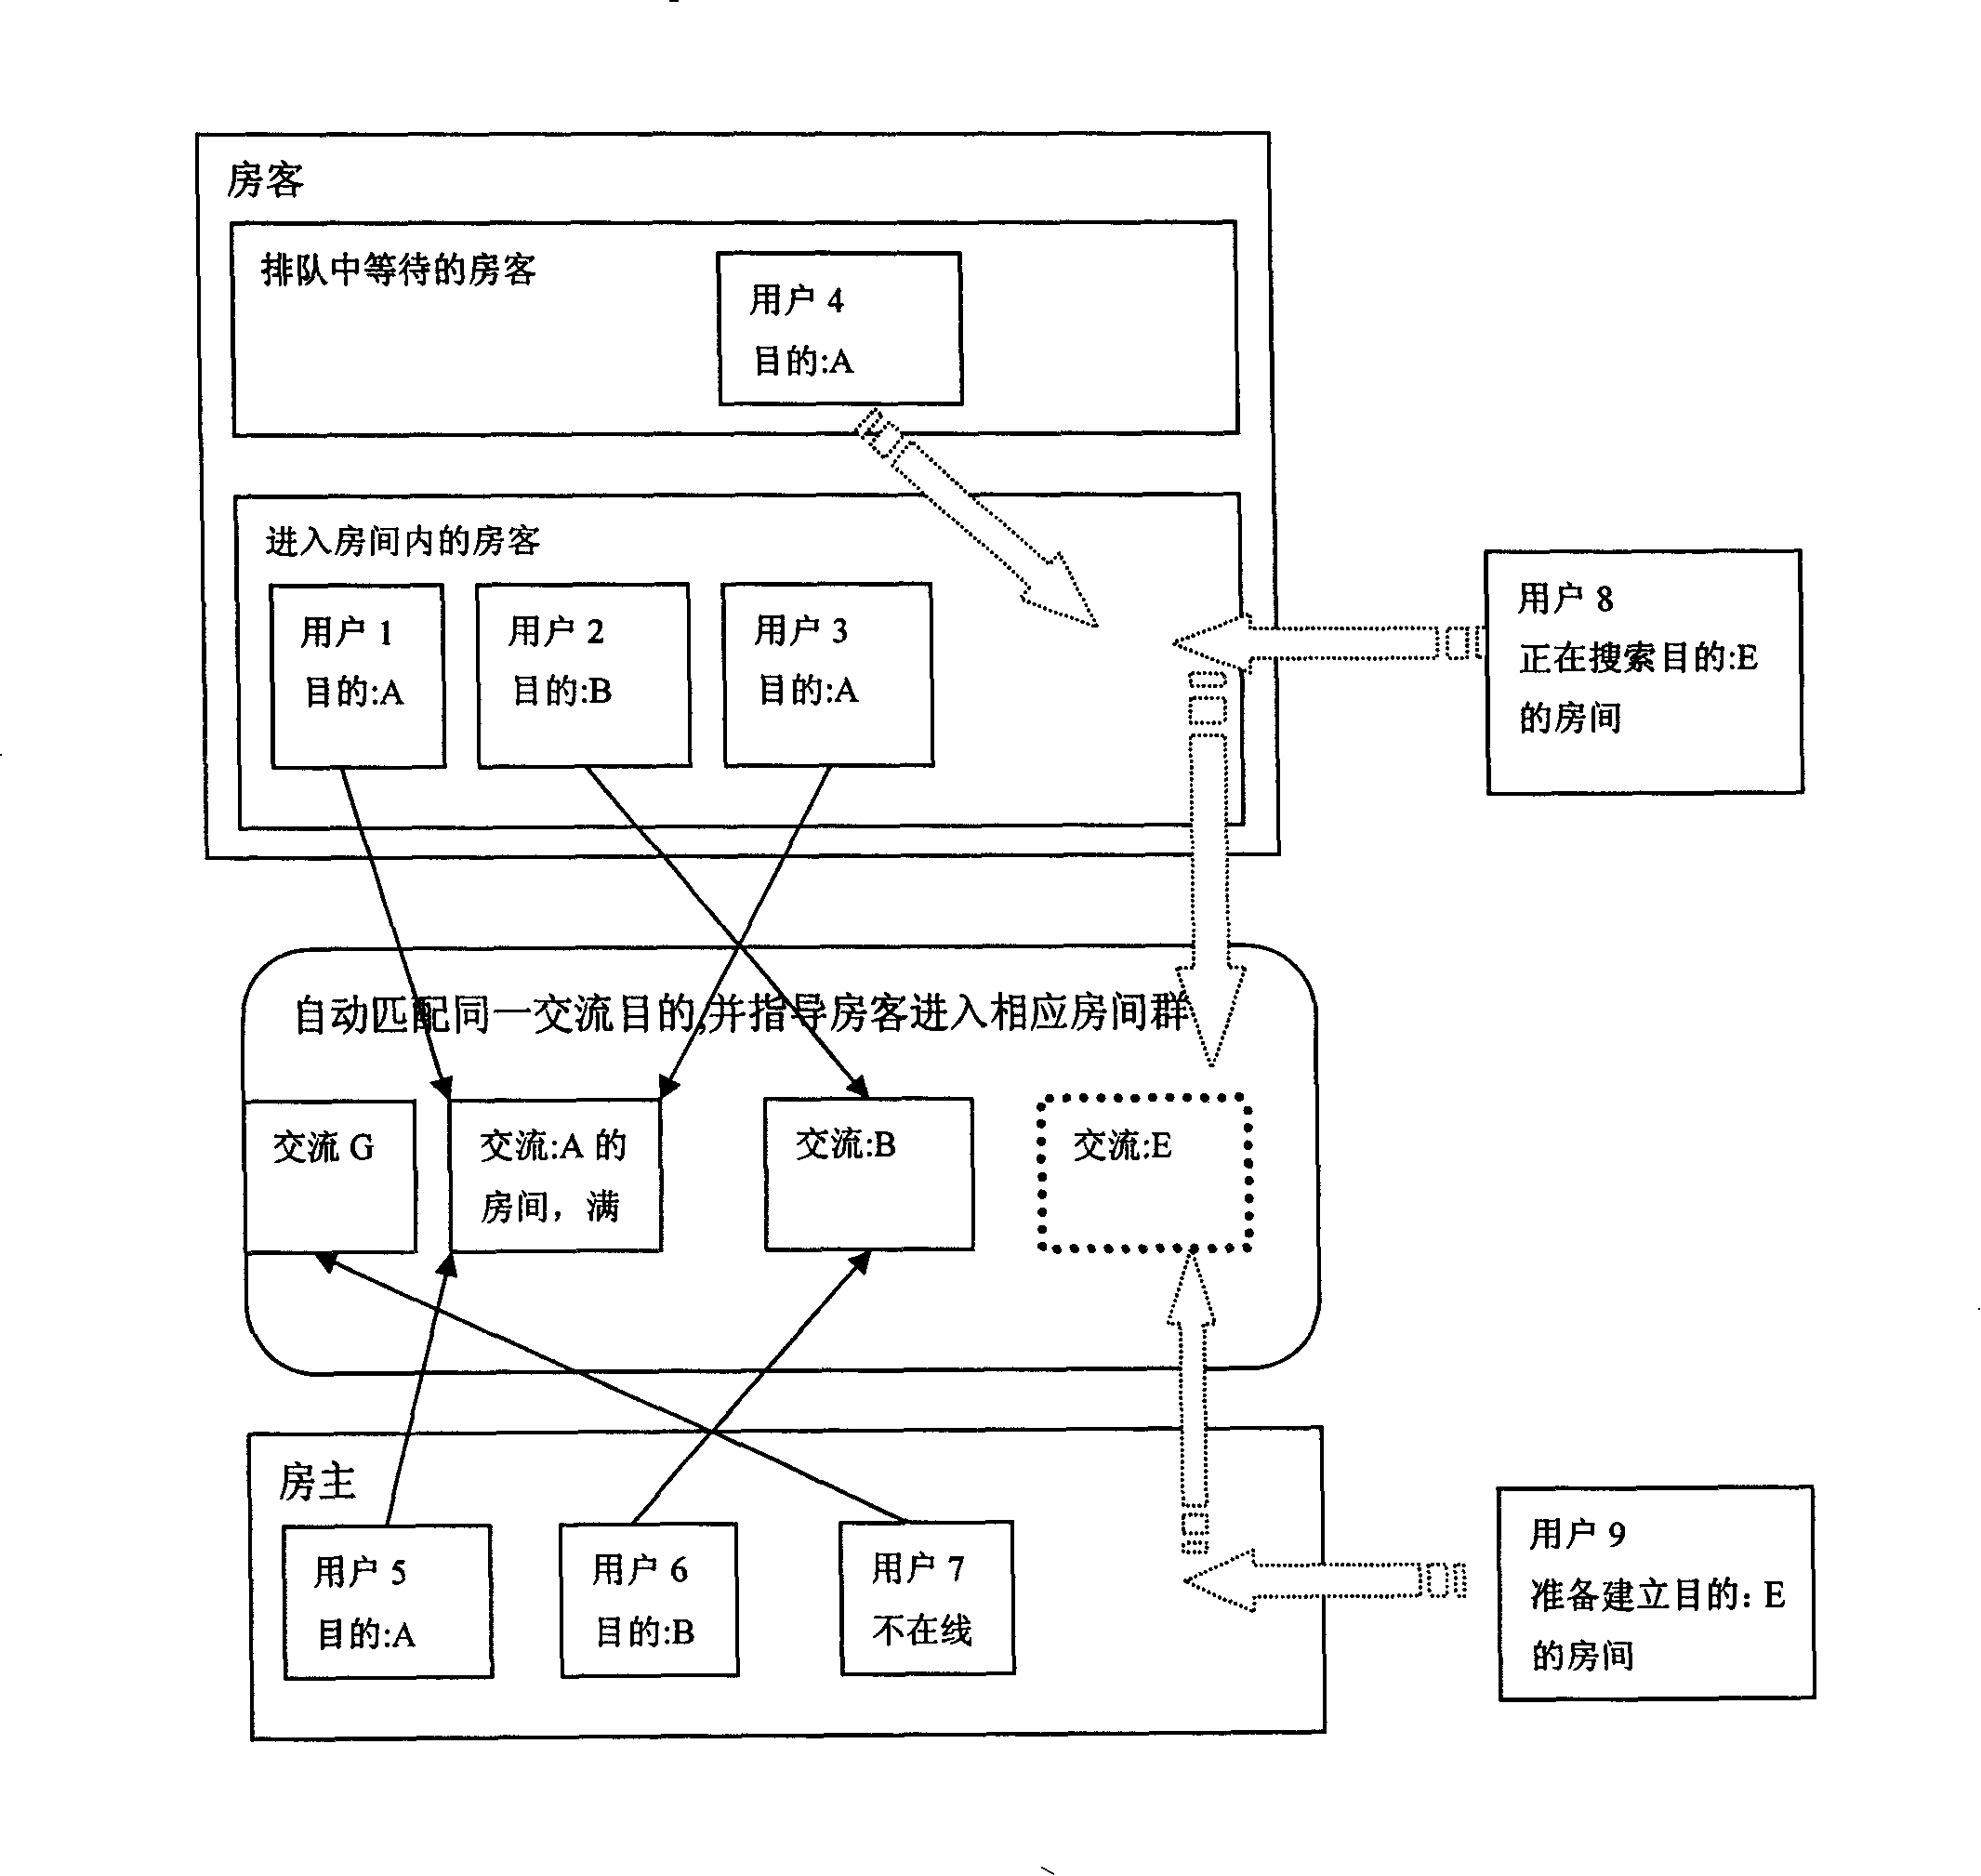 Method for creating Internet virtual reception hall and realizing synchronous and asynchronous exchange by using flash plug-in technology